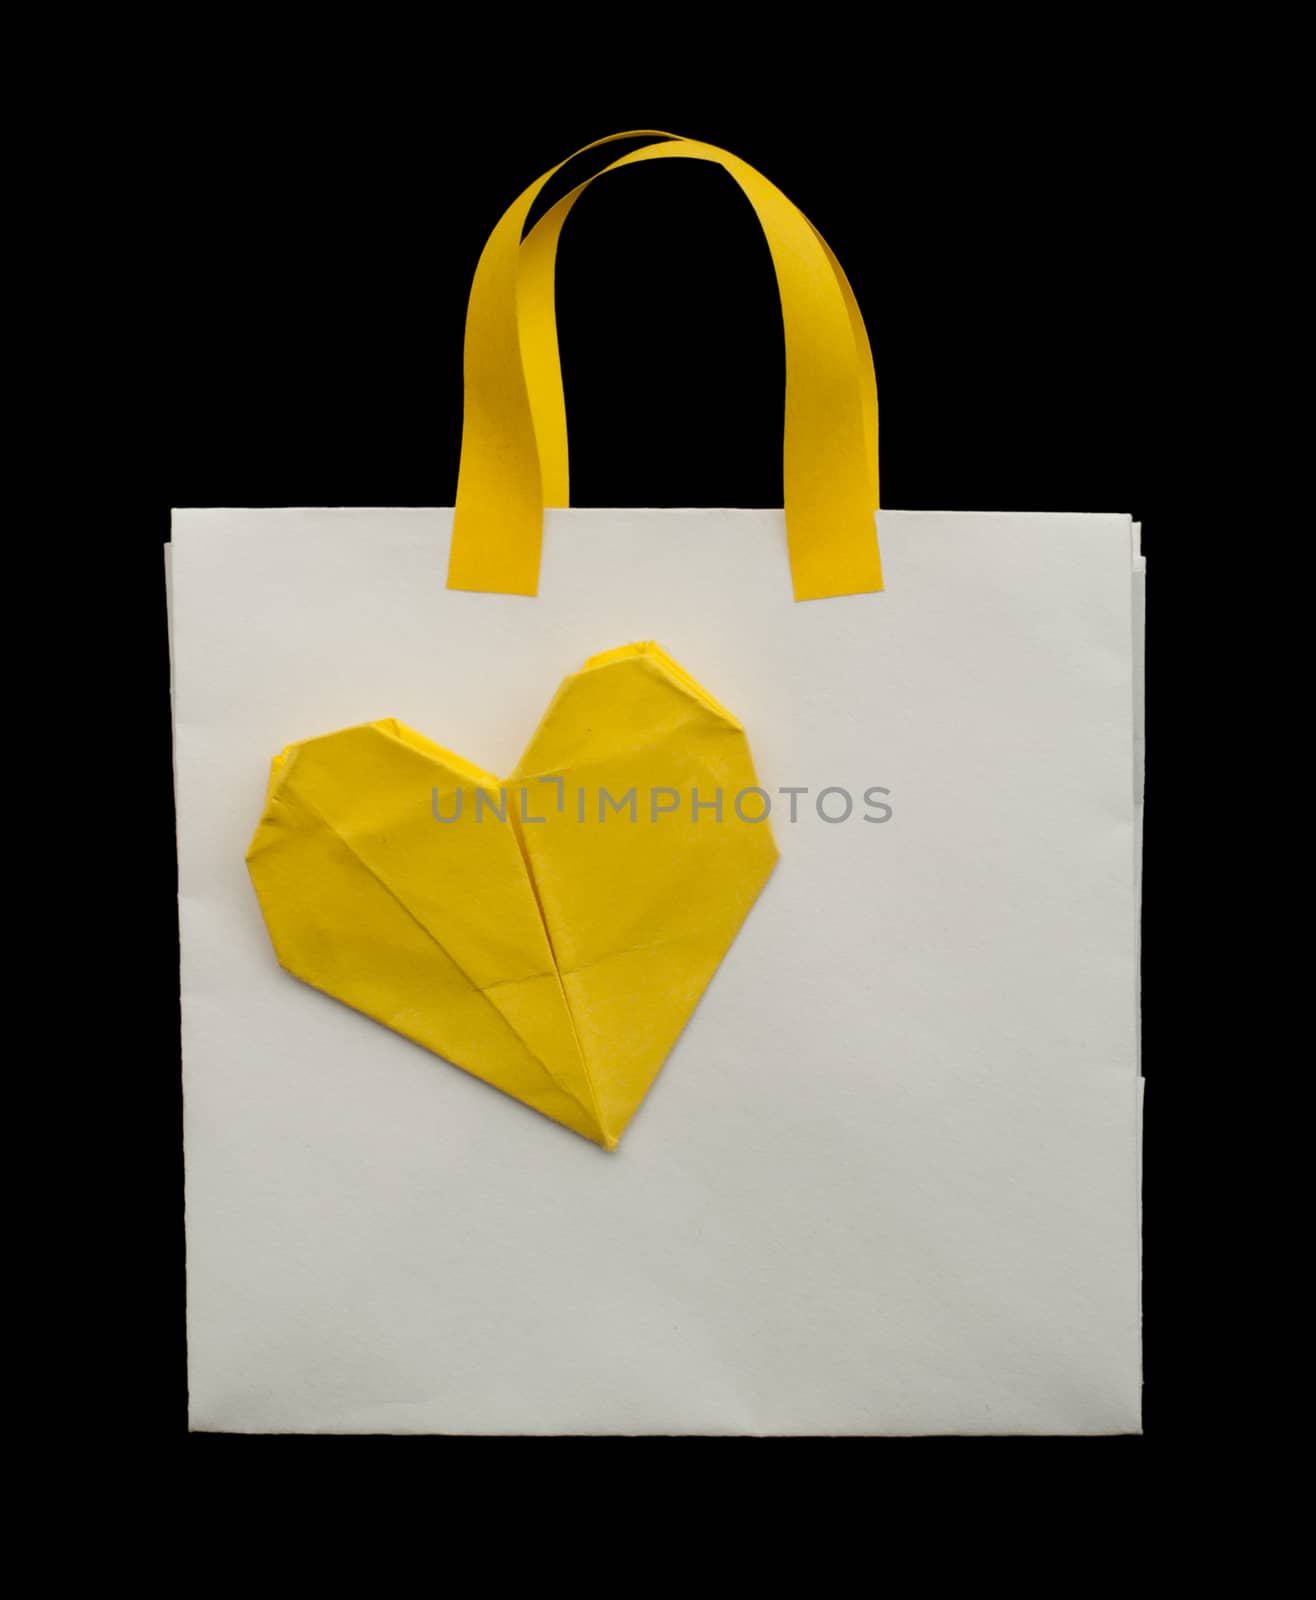 Yellow and white shopping bag with yellow heart.